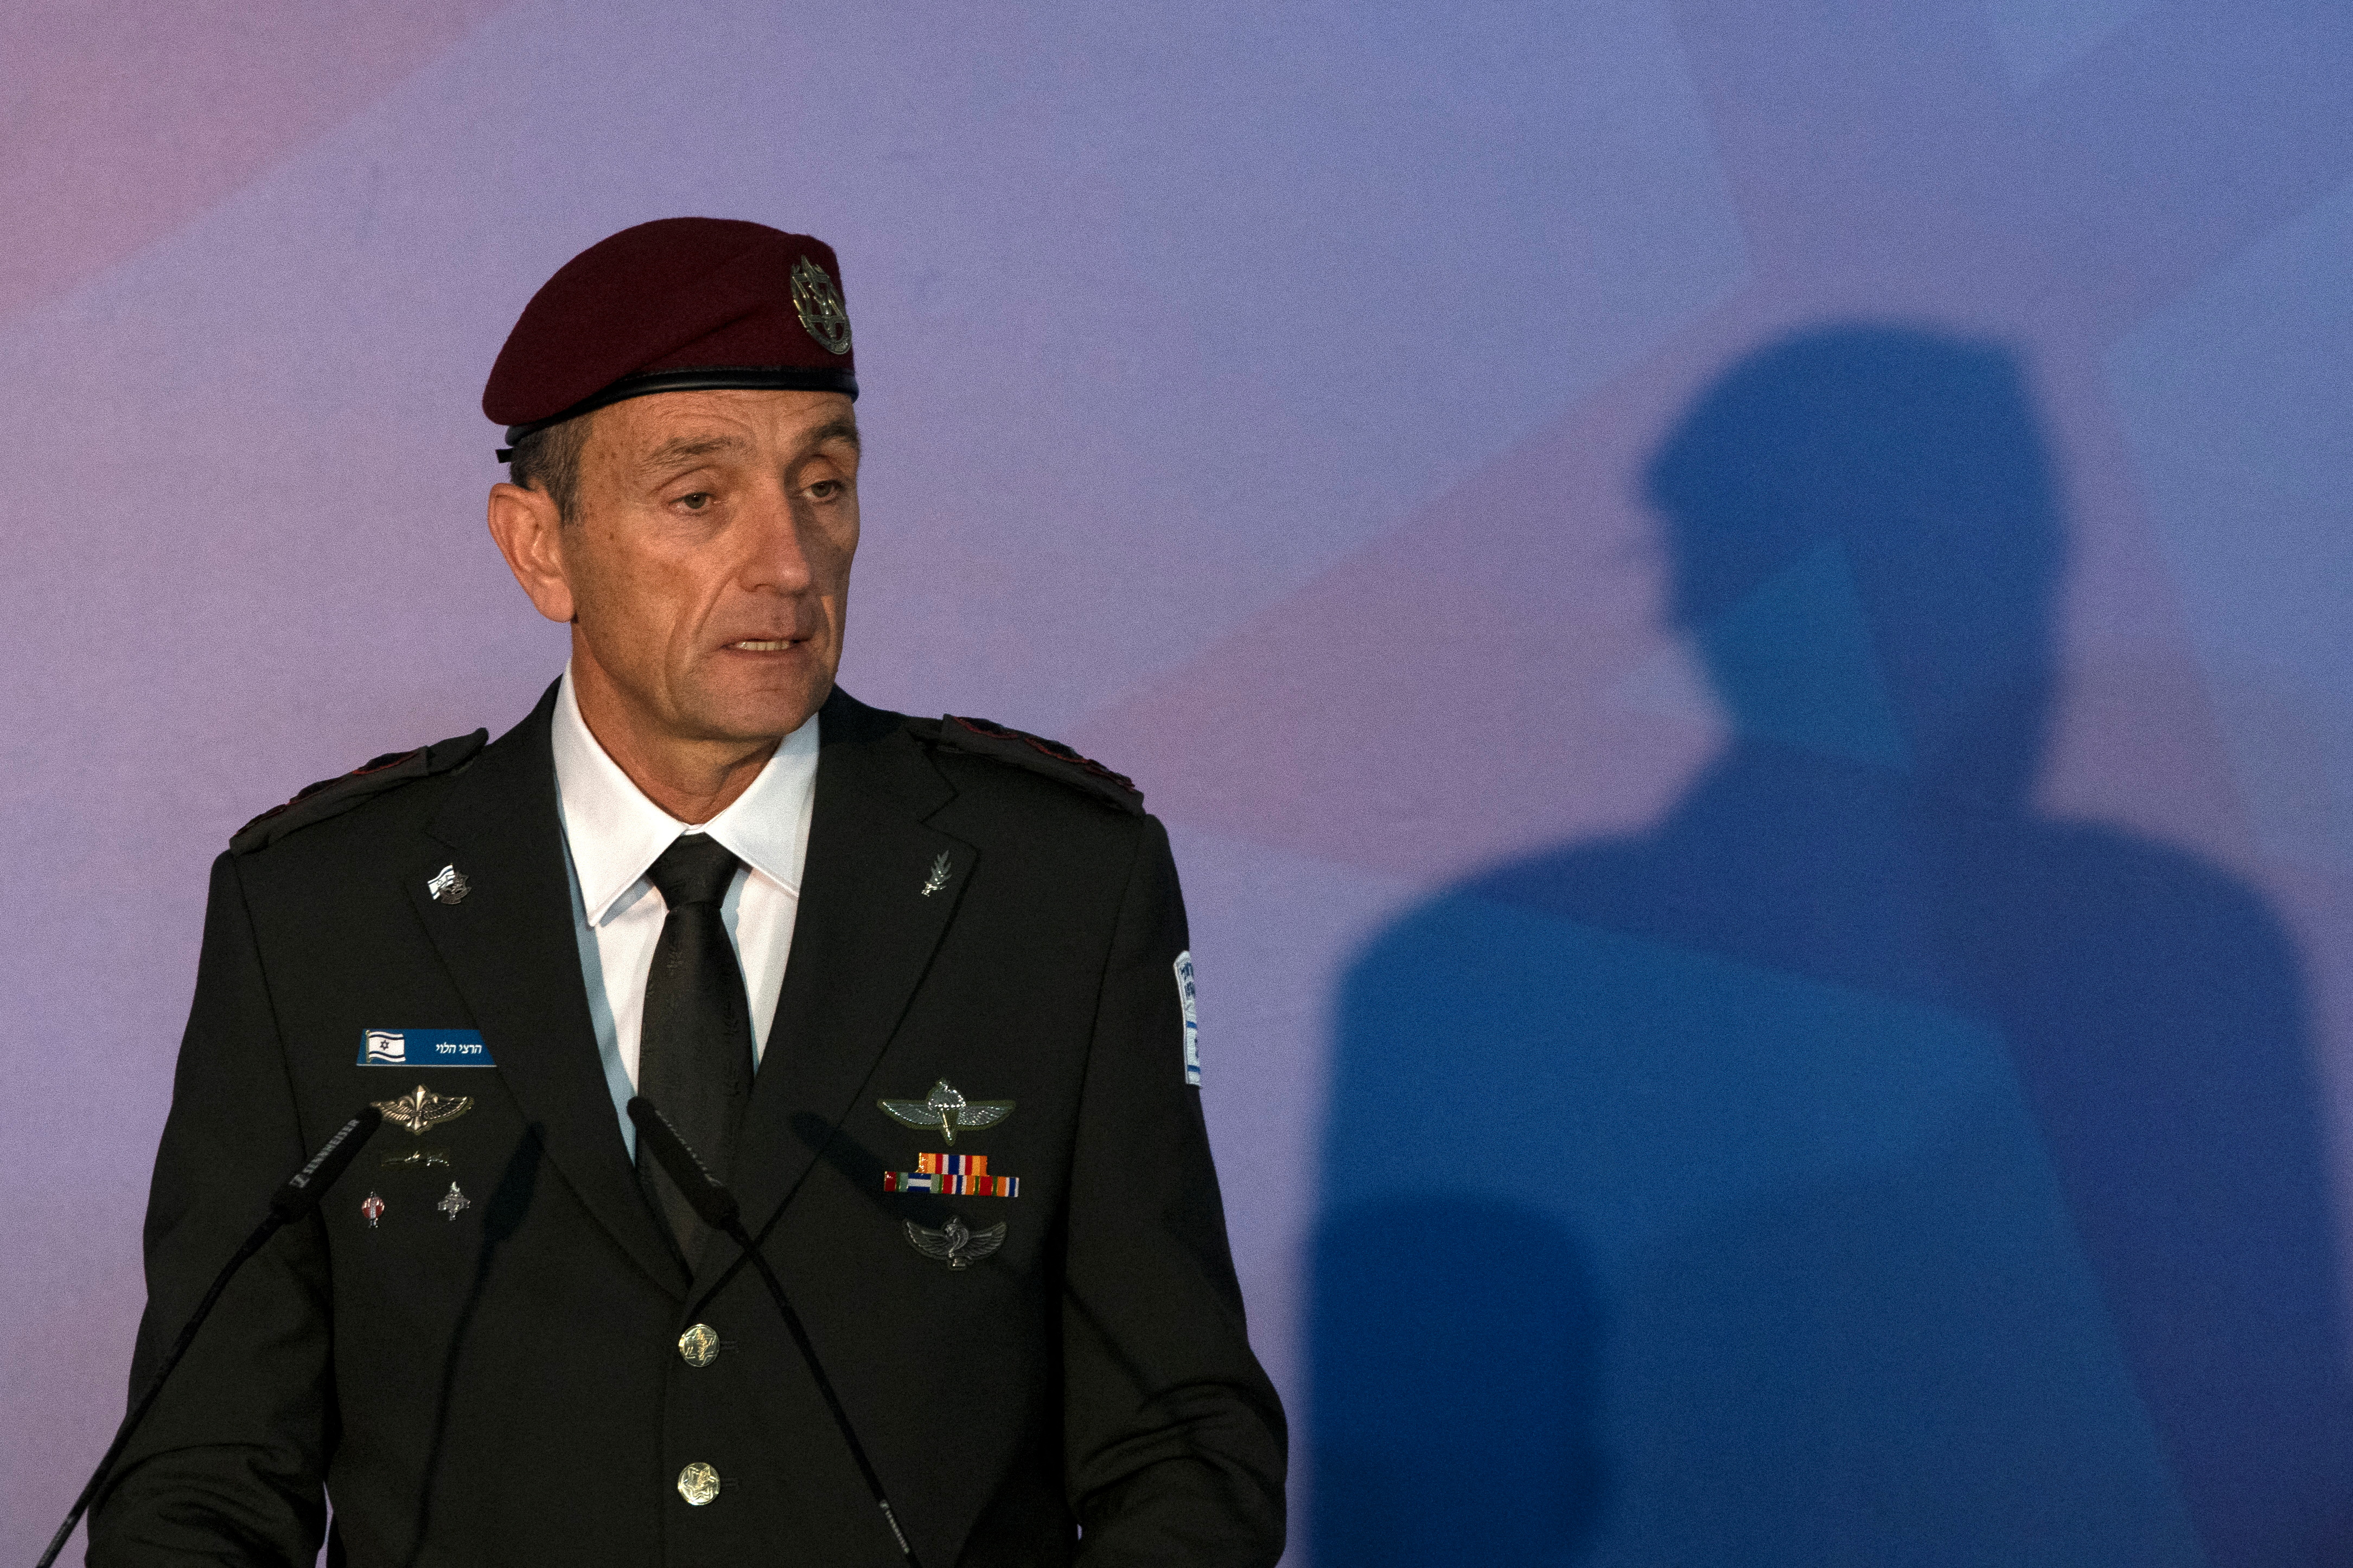 Herzi Halevi, the Israel Defense Forces chief of the general staff, speaks during his transition ceremony in Jerusalem on January 16.